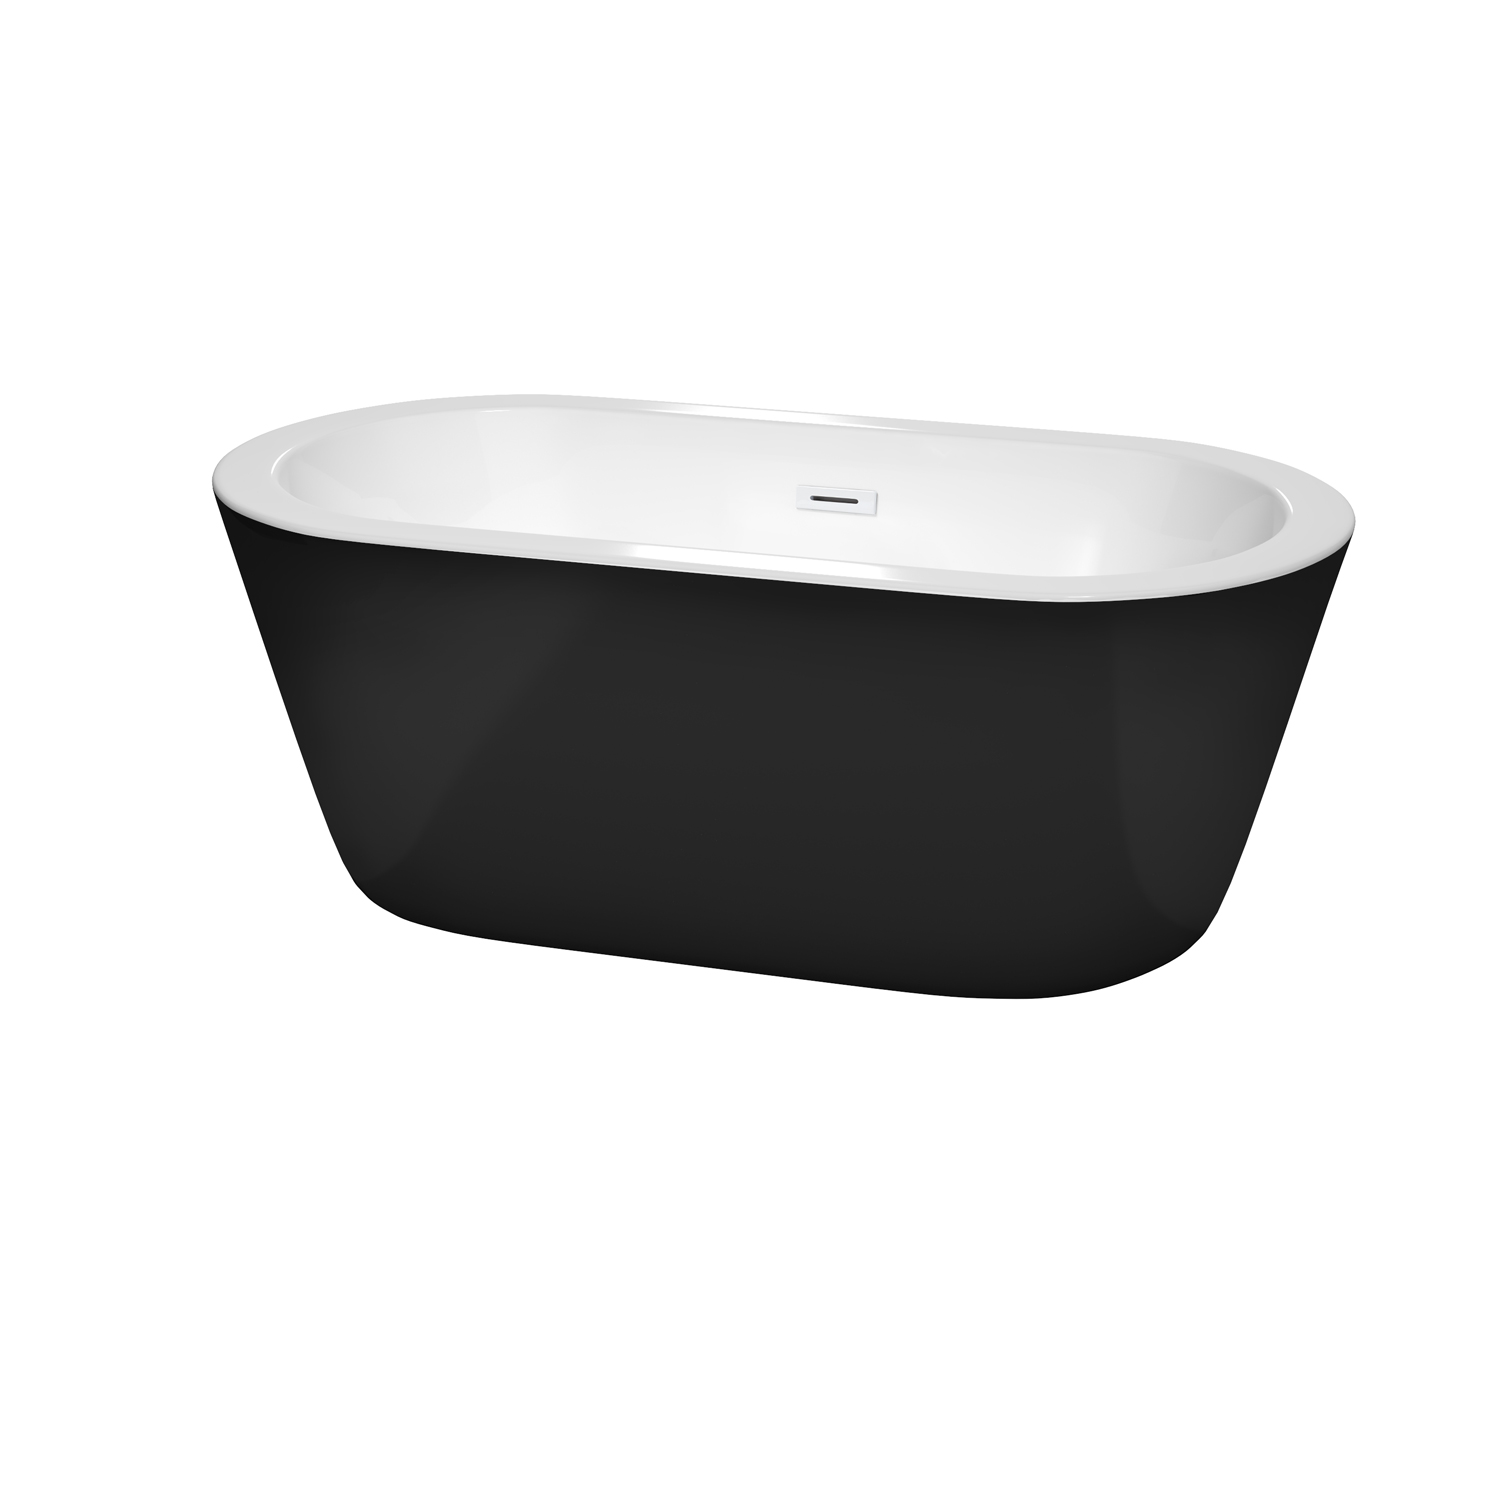 60" Freestanding Bathtub in Black with White Interior with Shiny White Drain and Overflow Trim